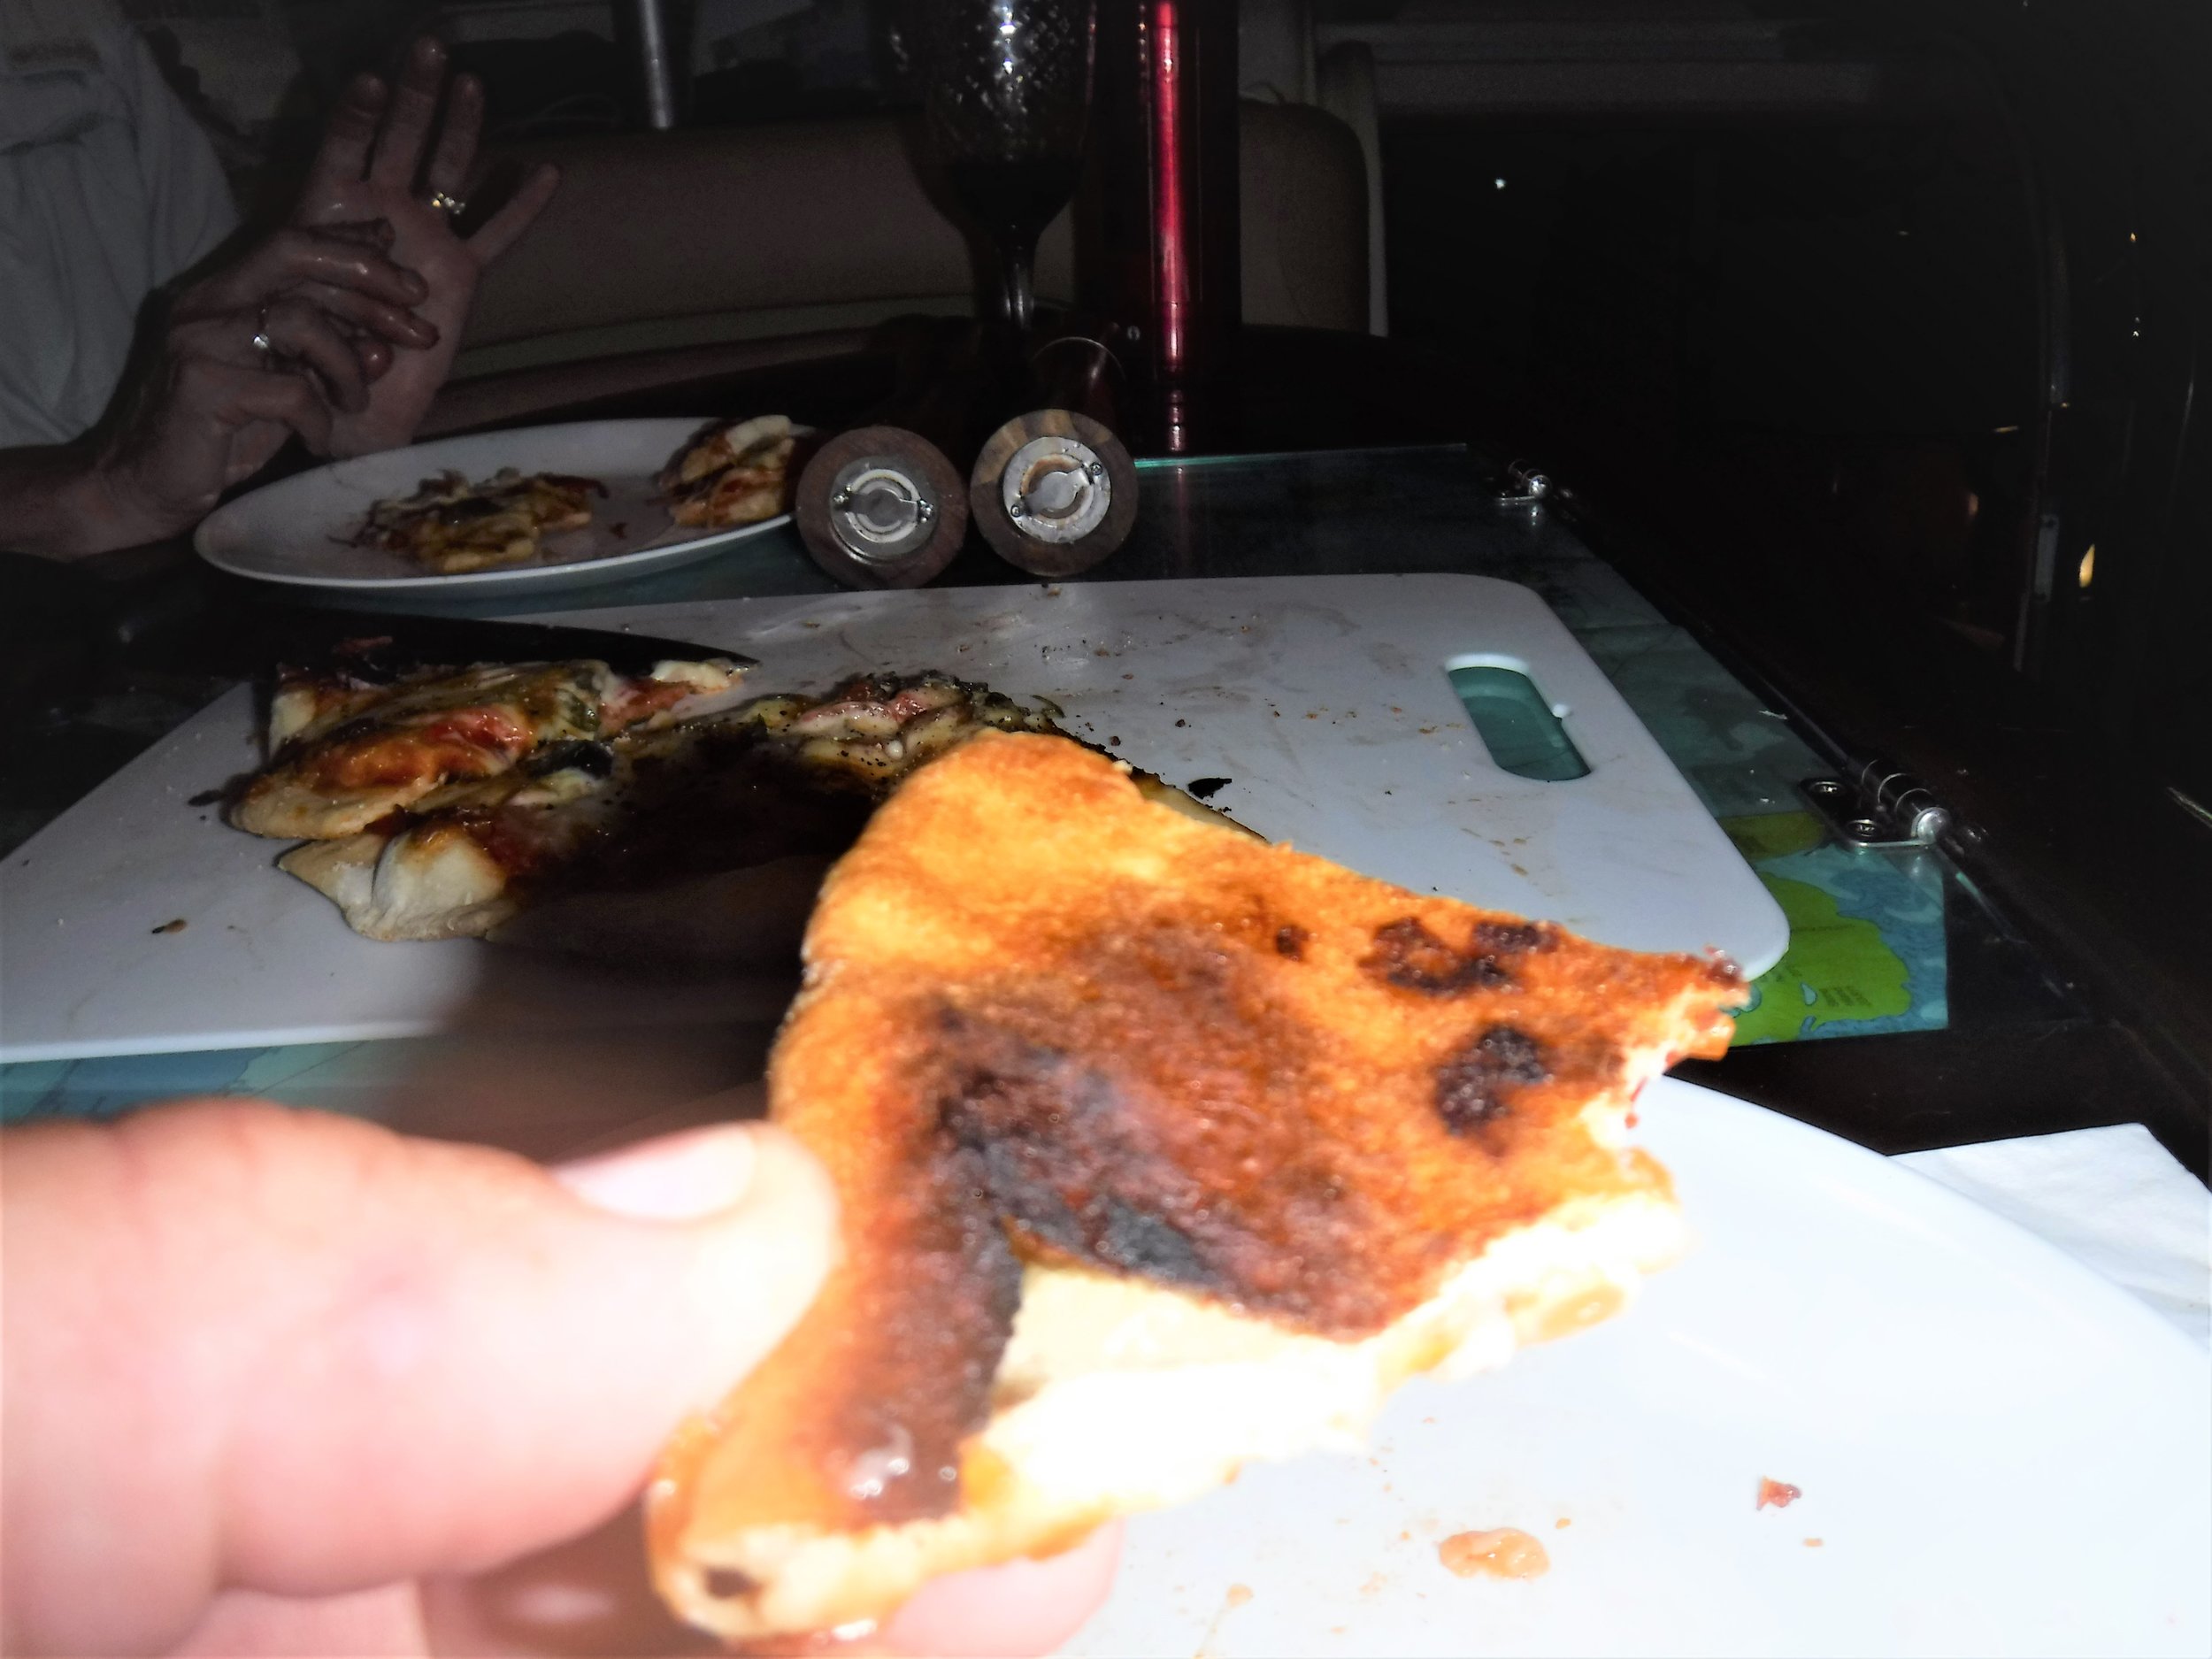 What a really good pizza crust should look like underneath. These little BBQ's really get hot.